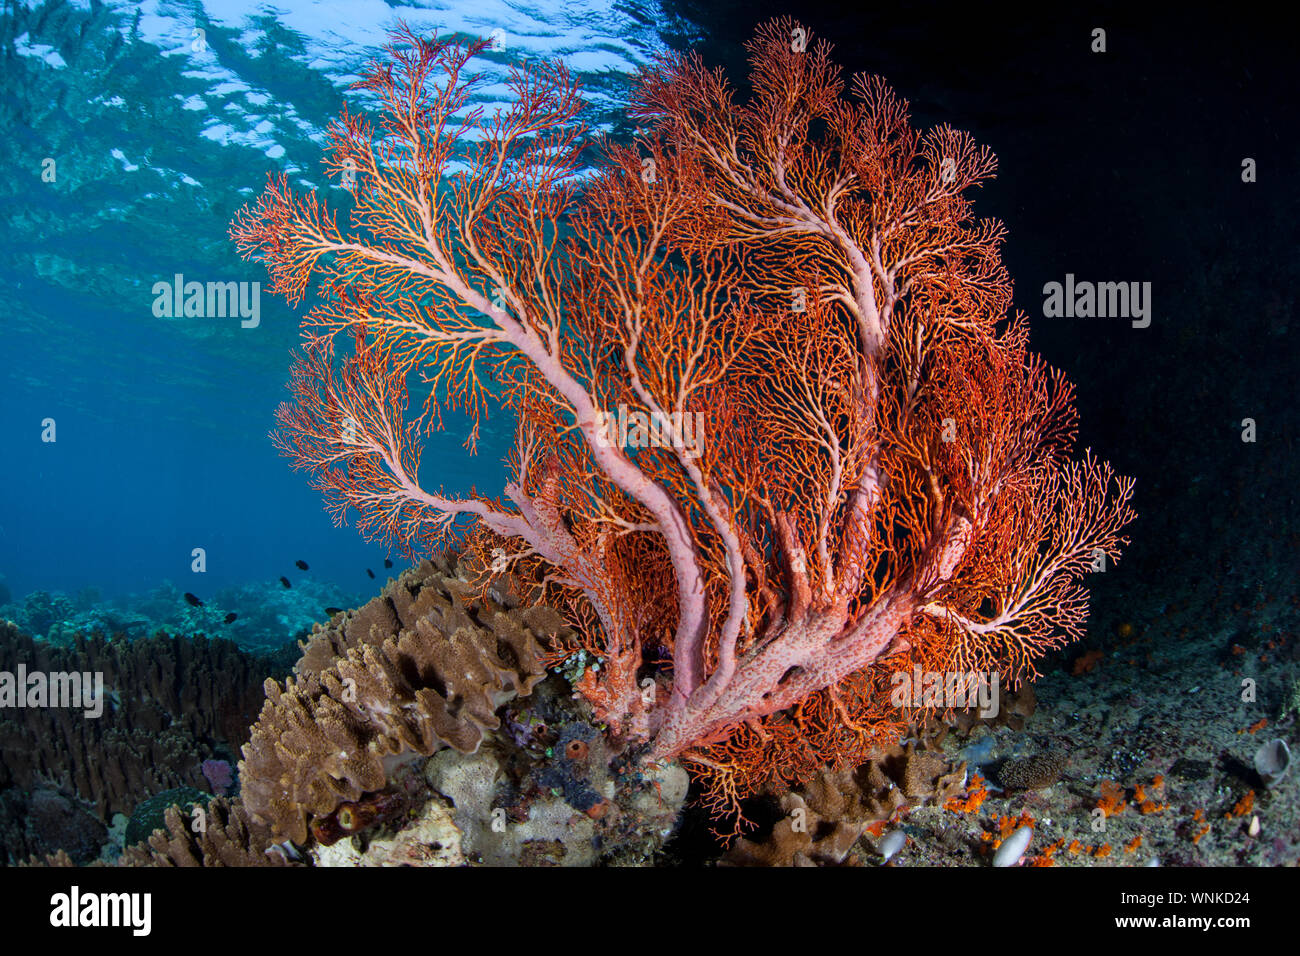 A large sea fan grows in shallow water amid the remote islands of Raja Ampat, Indonesia. This equatorial region is the center for marine biodiversity. Stock Photo